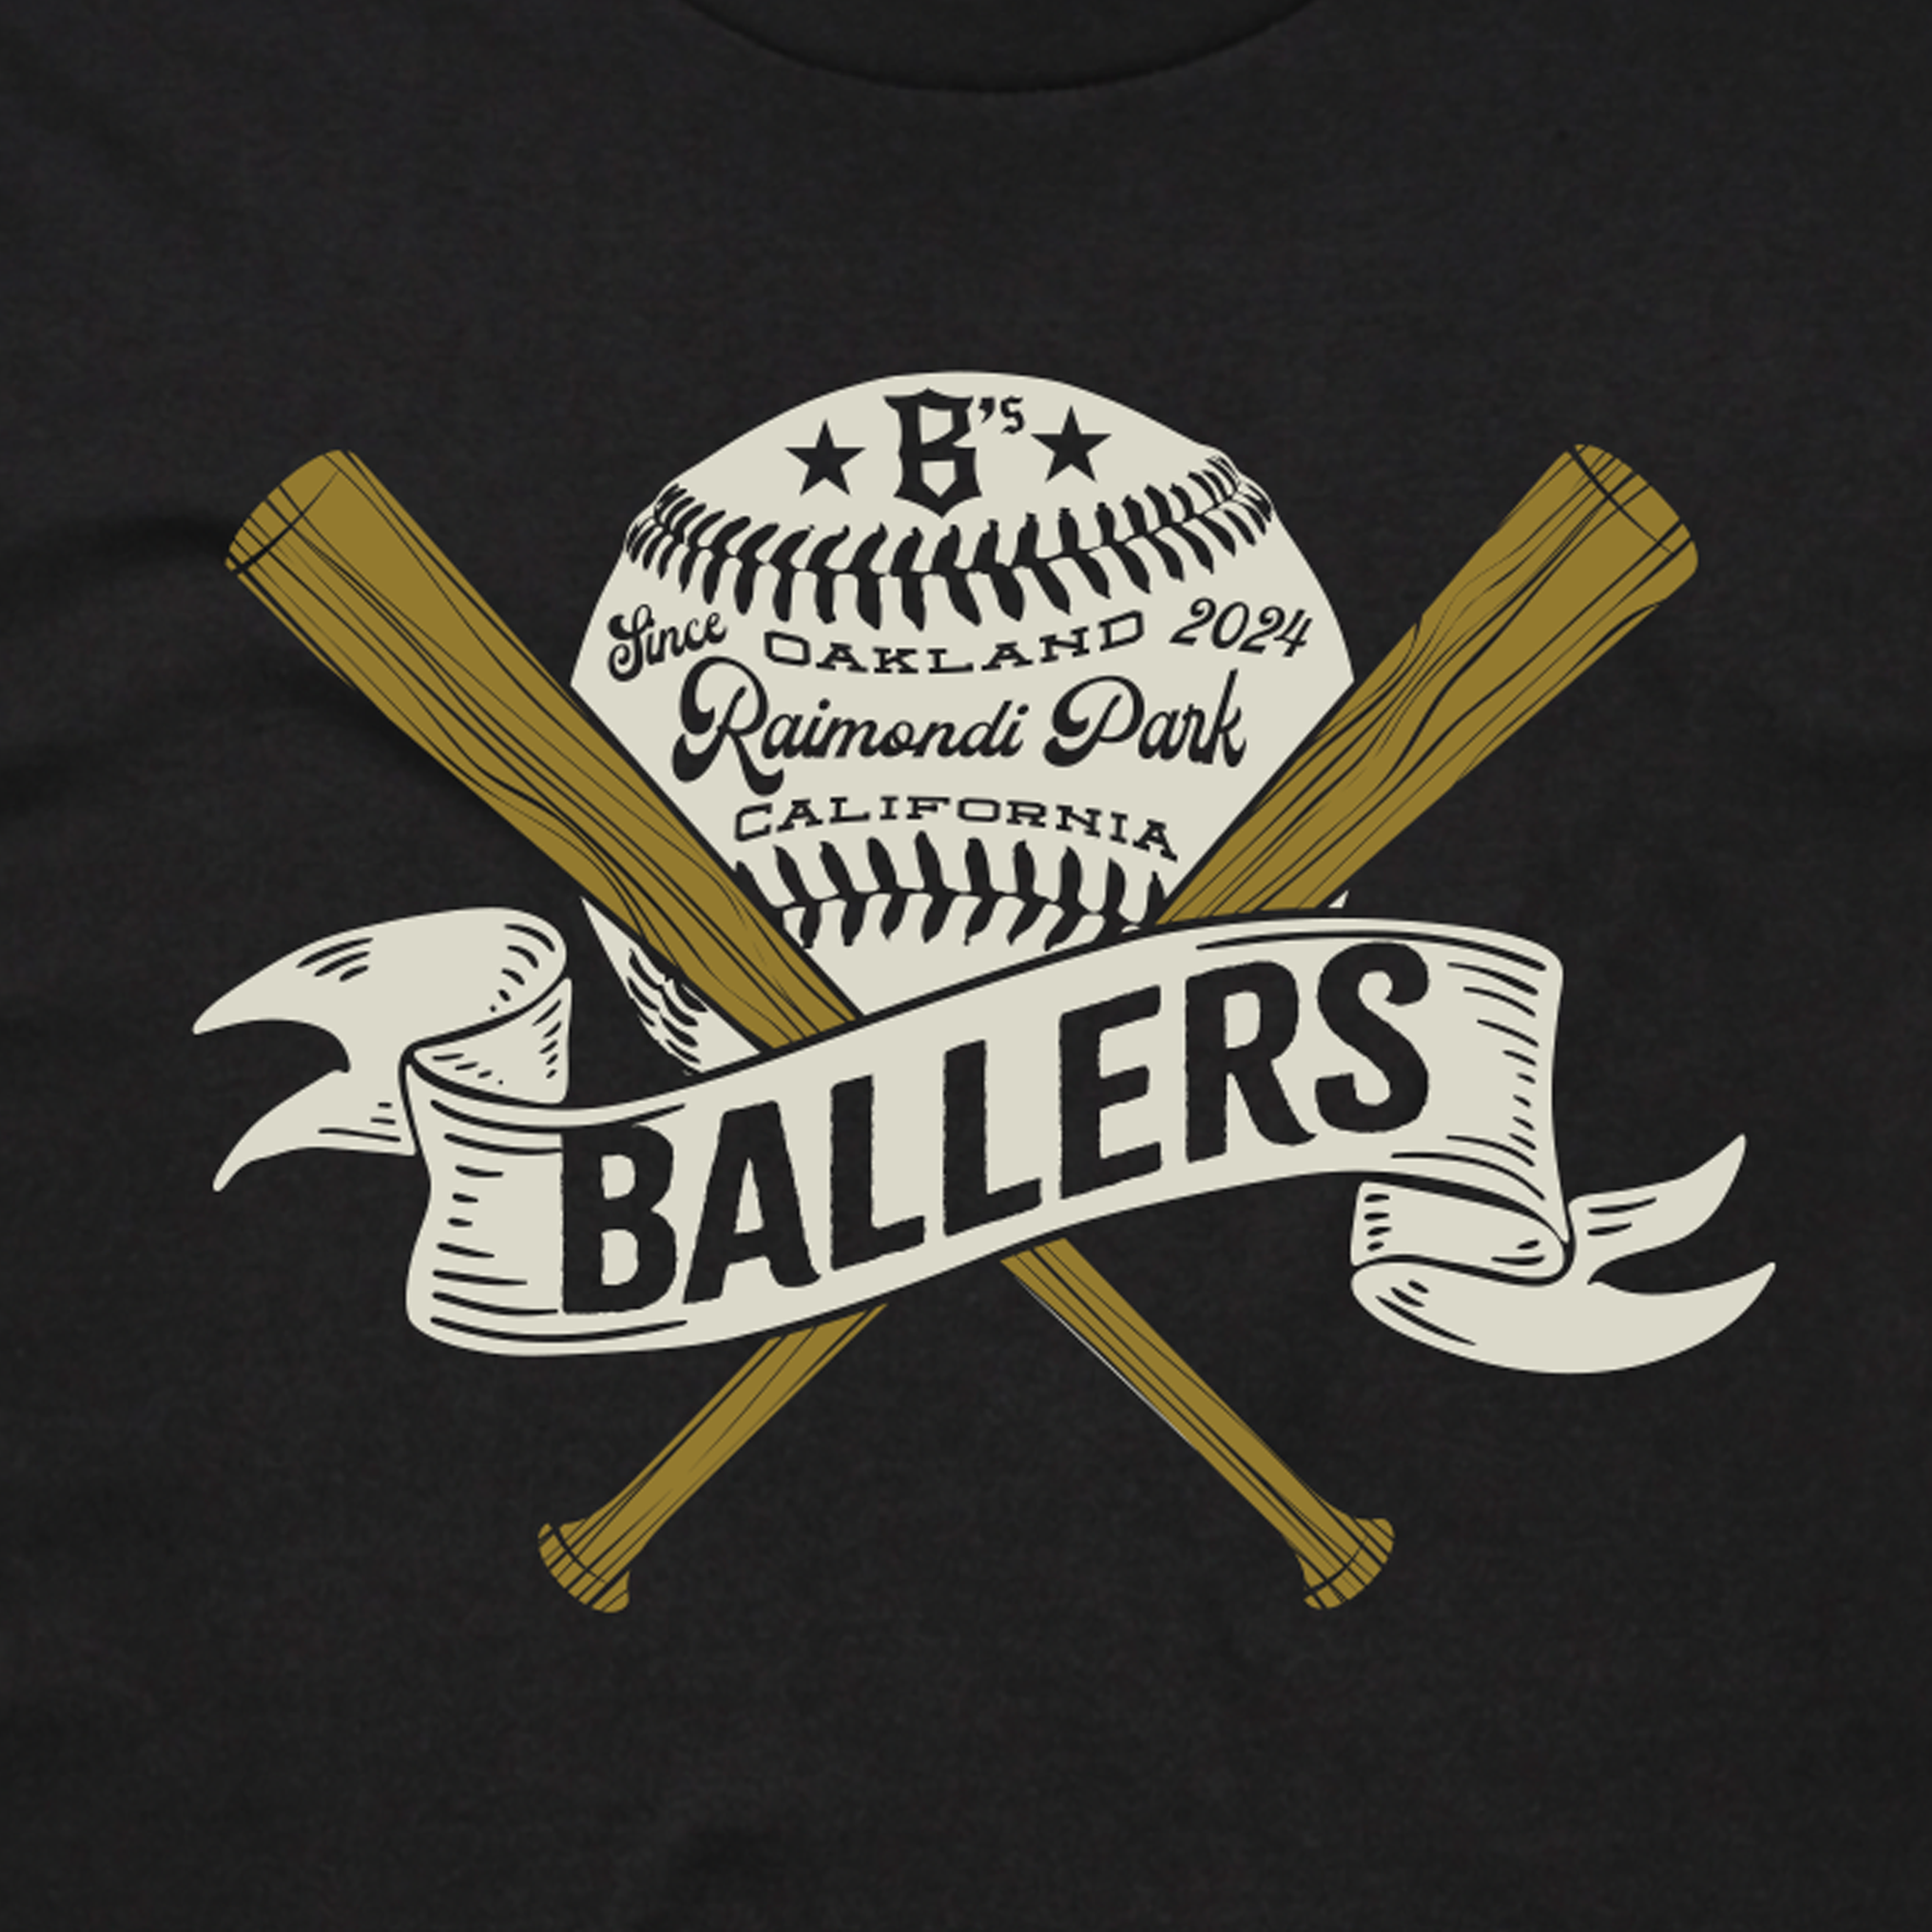 detail shot of Black with crossed wooden bats and a Baseball. Banner in front of bats saying Ballers. Baseball Raimondi Park. Oakland California, Since 2024.